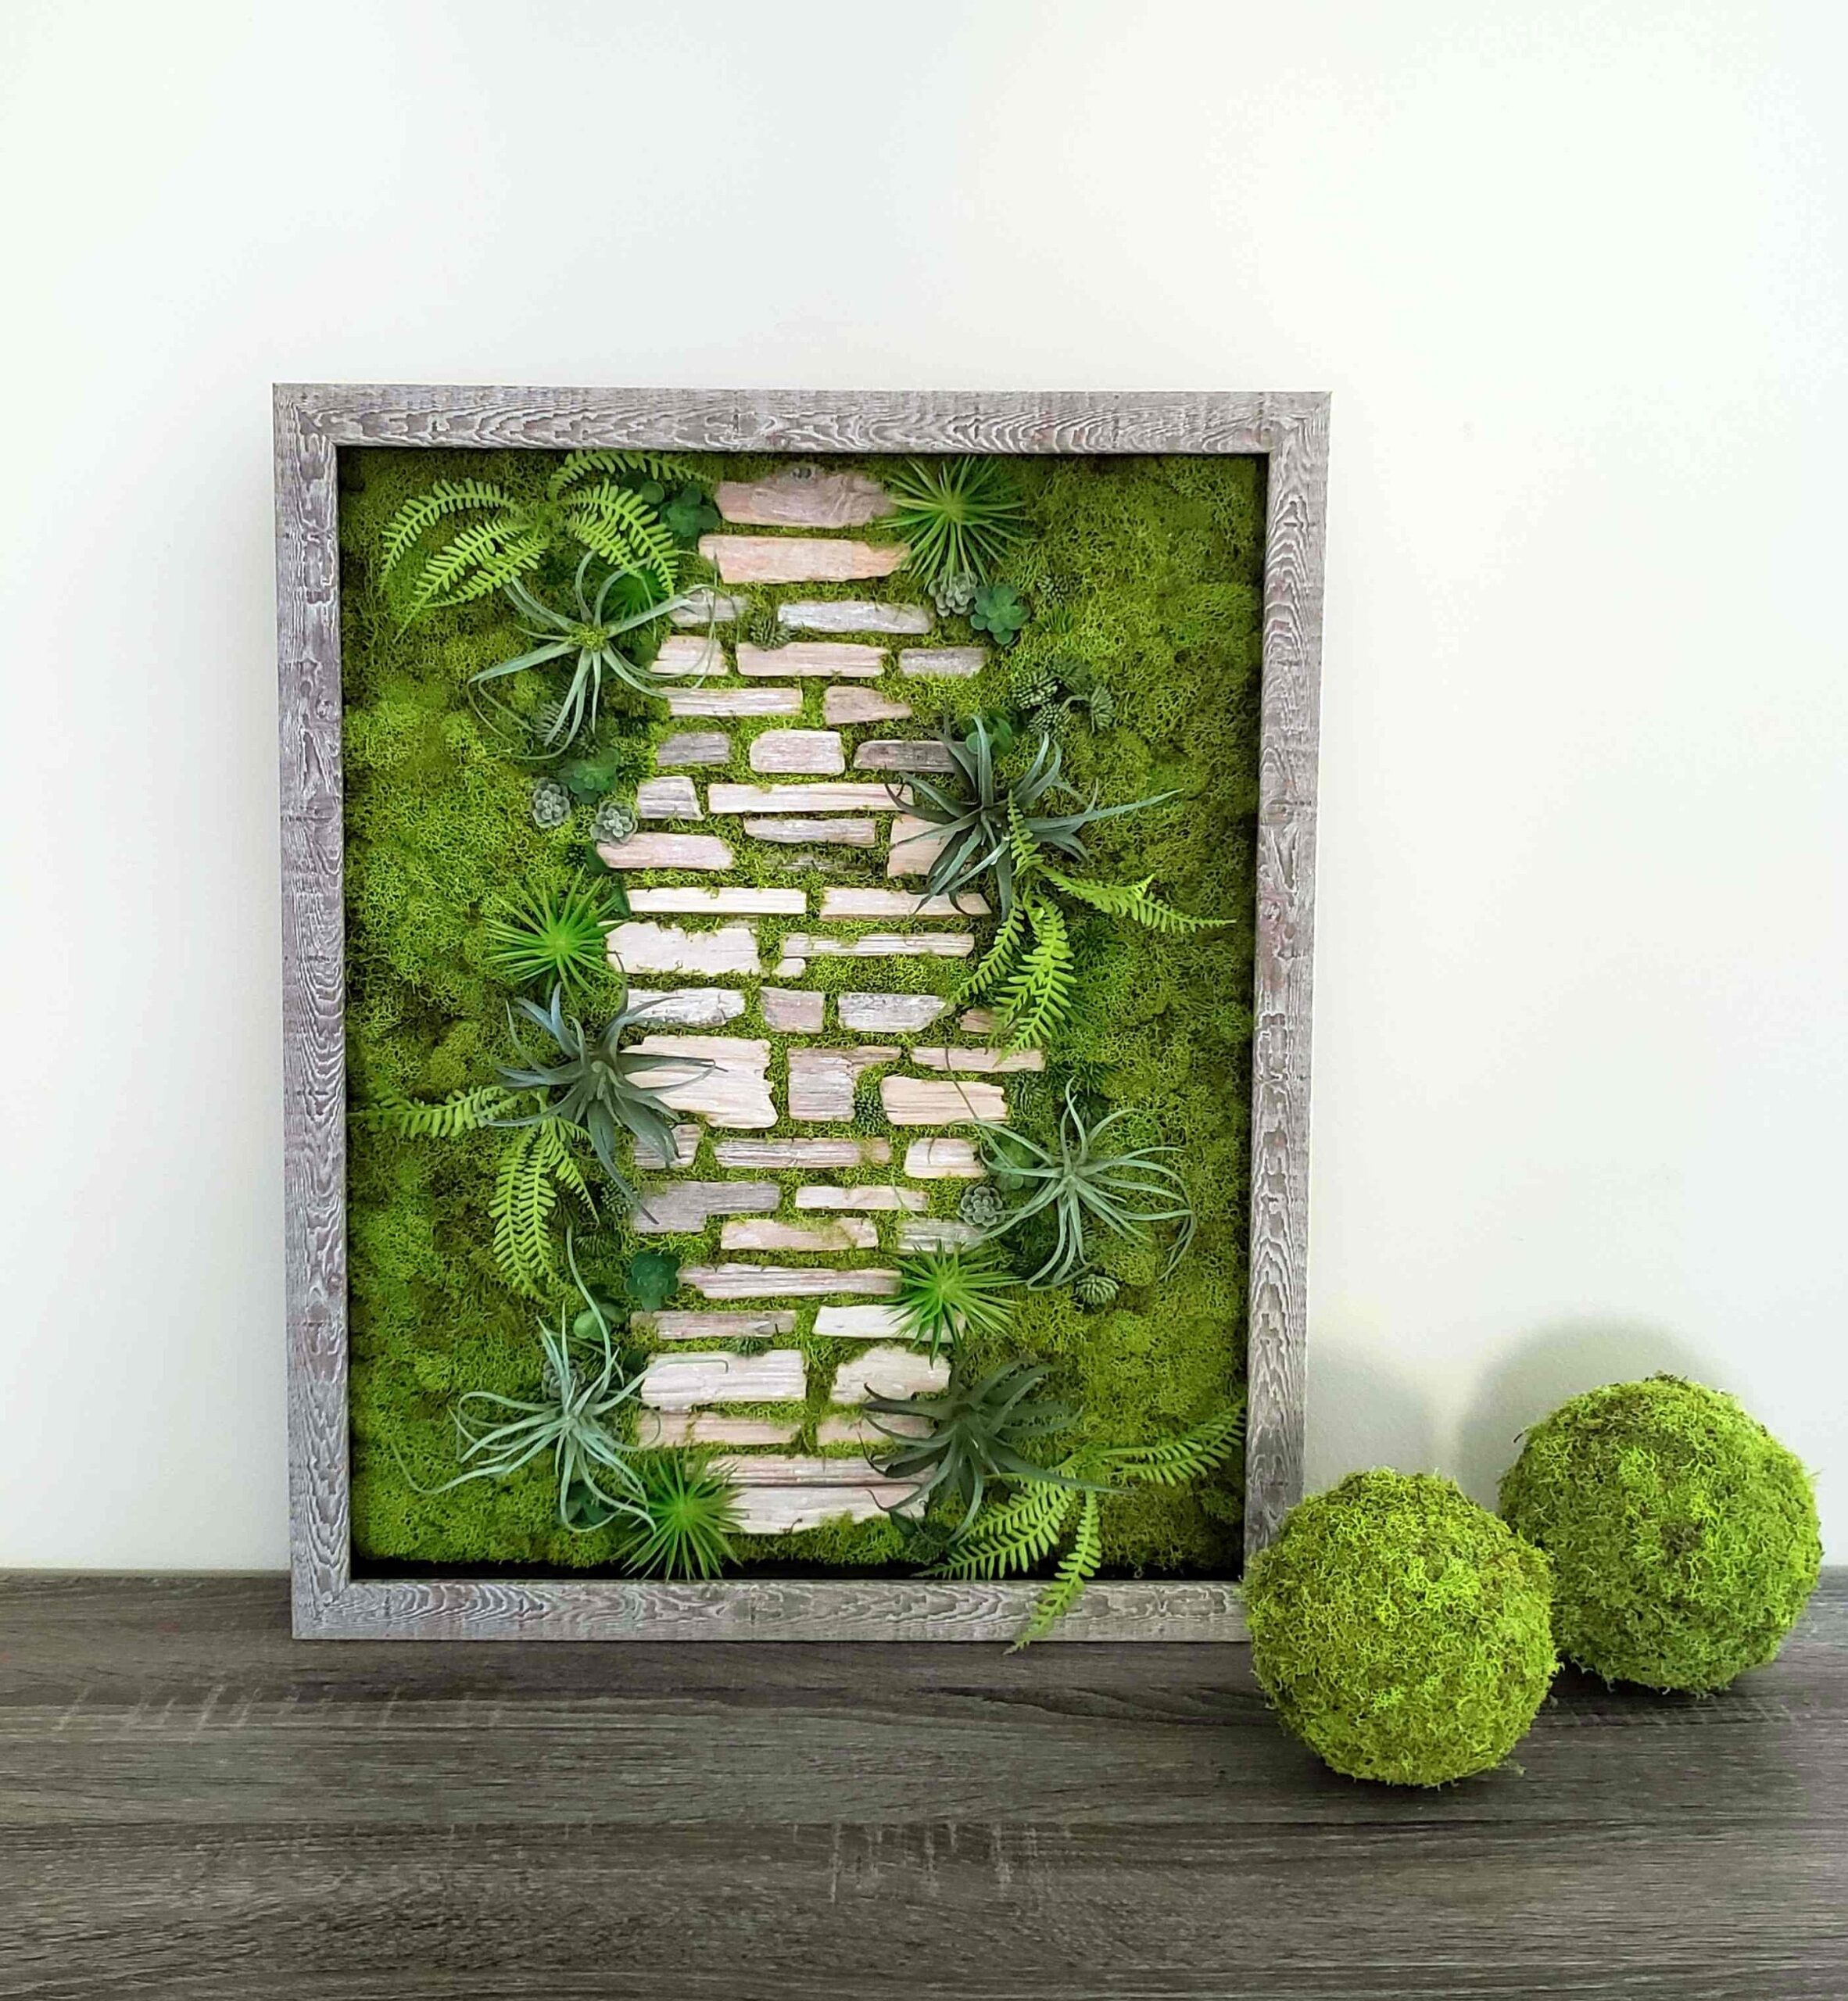 In Stock: Unique Realistic Faux Artificial Succulents Moss Living Wall  Planter